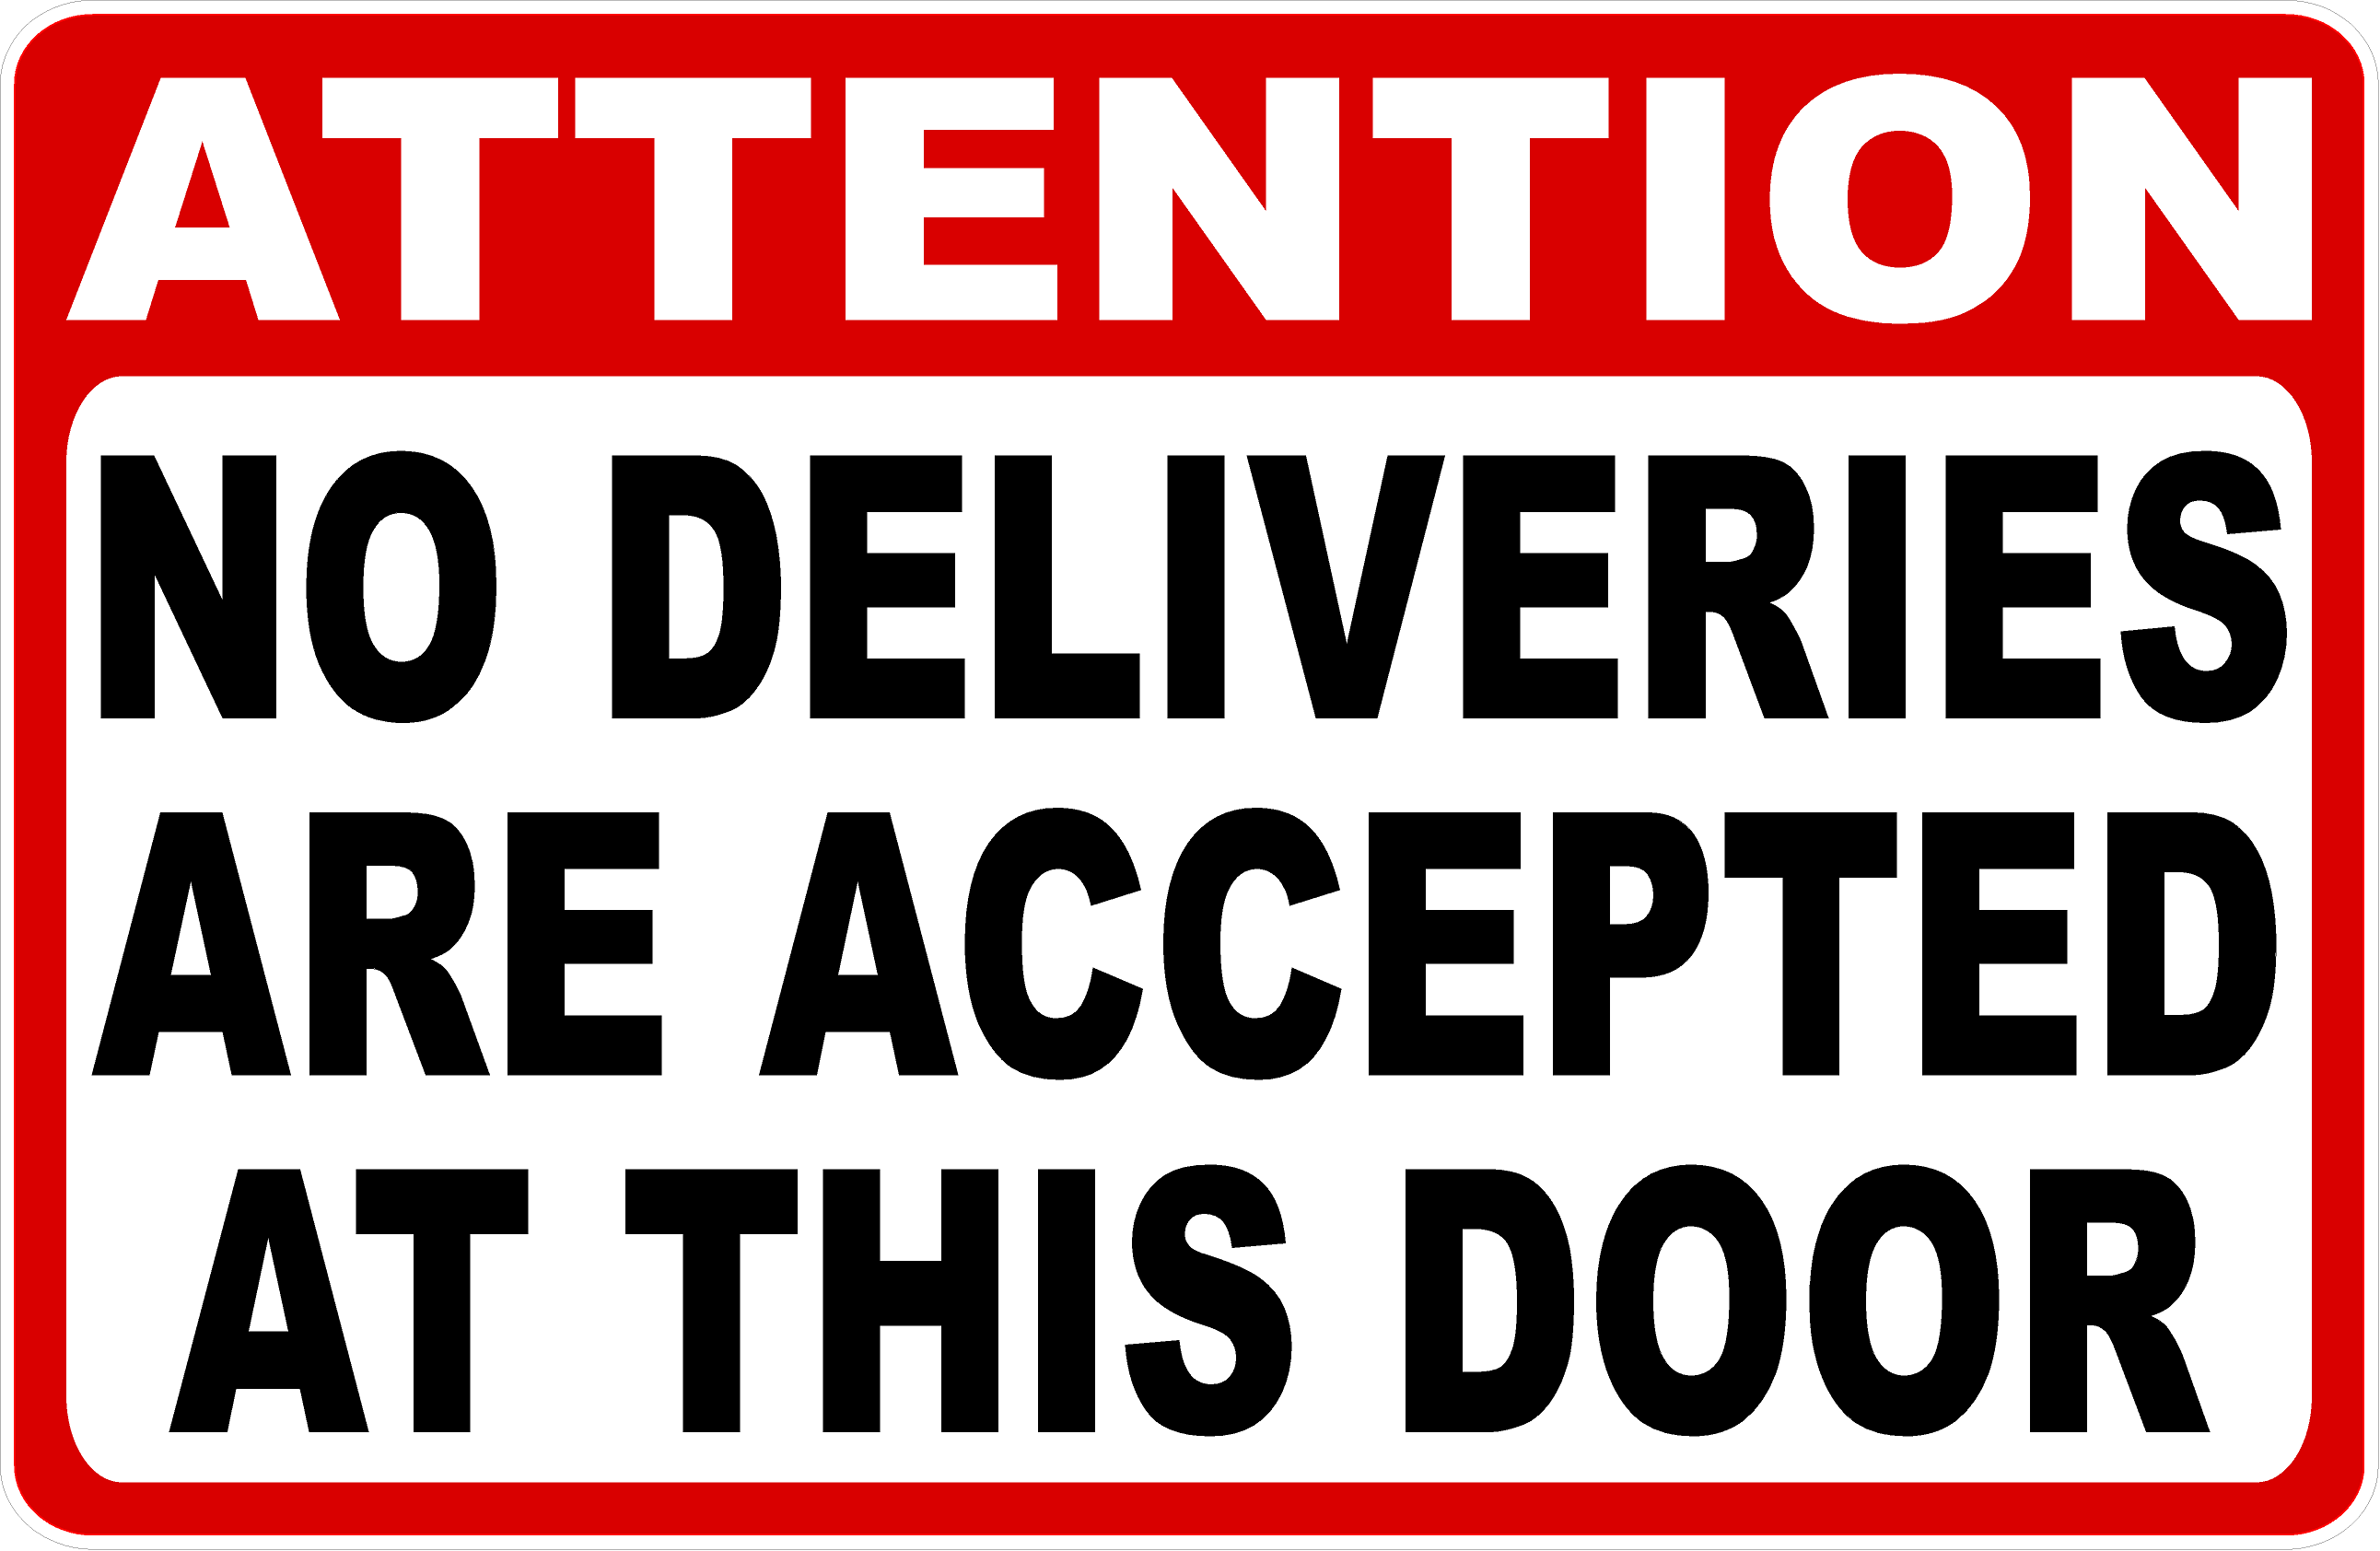 Attention No Deliveries Accepted At This Door Sign